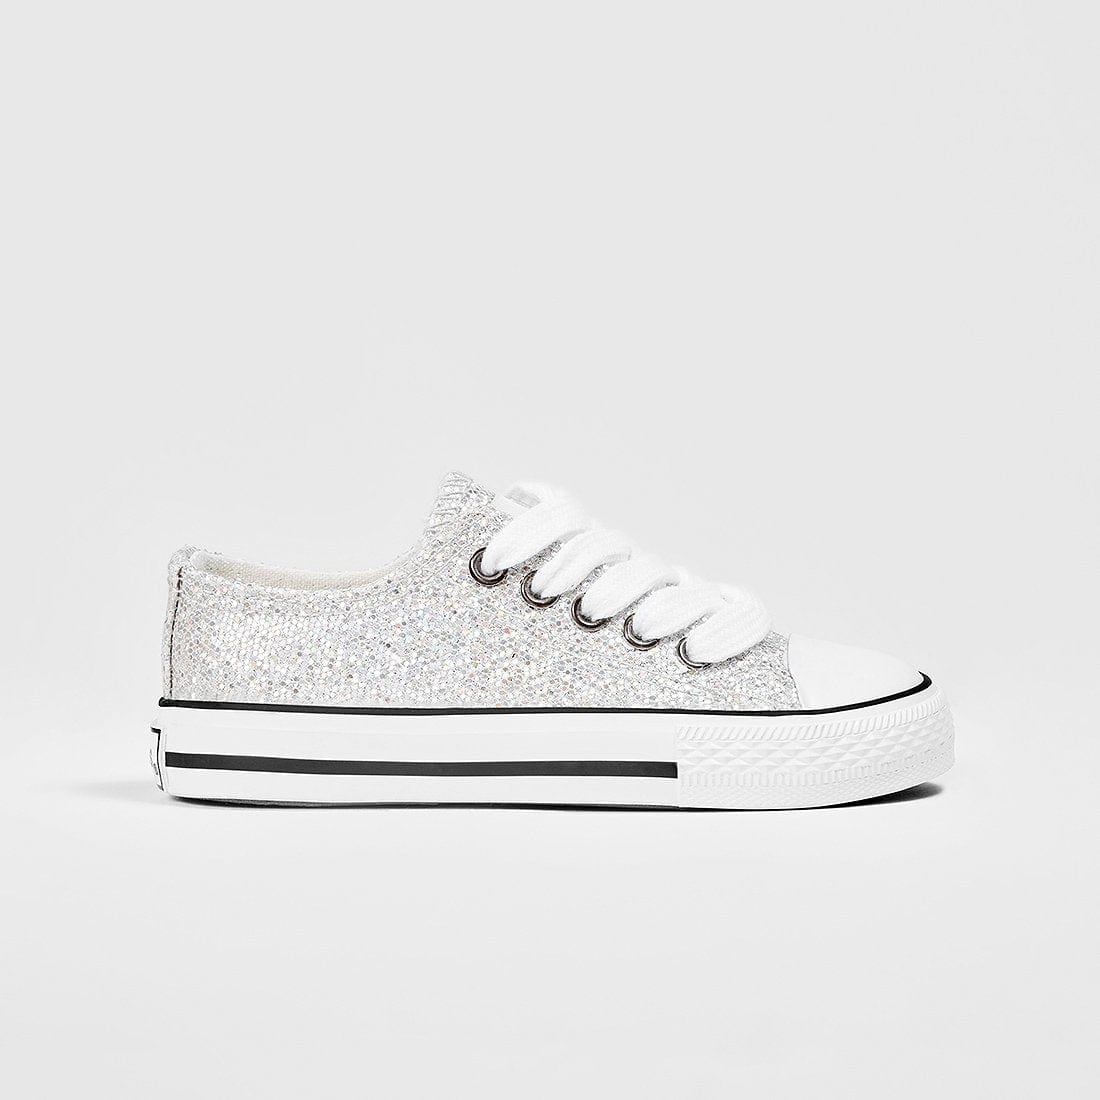 CONGUITOS Shoes Girl's Silver Glitter Sneakers